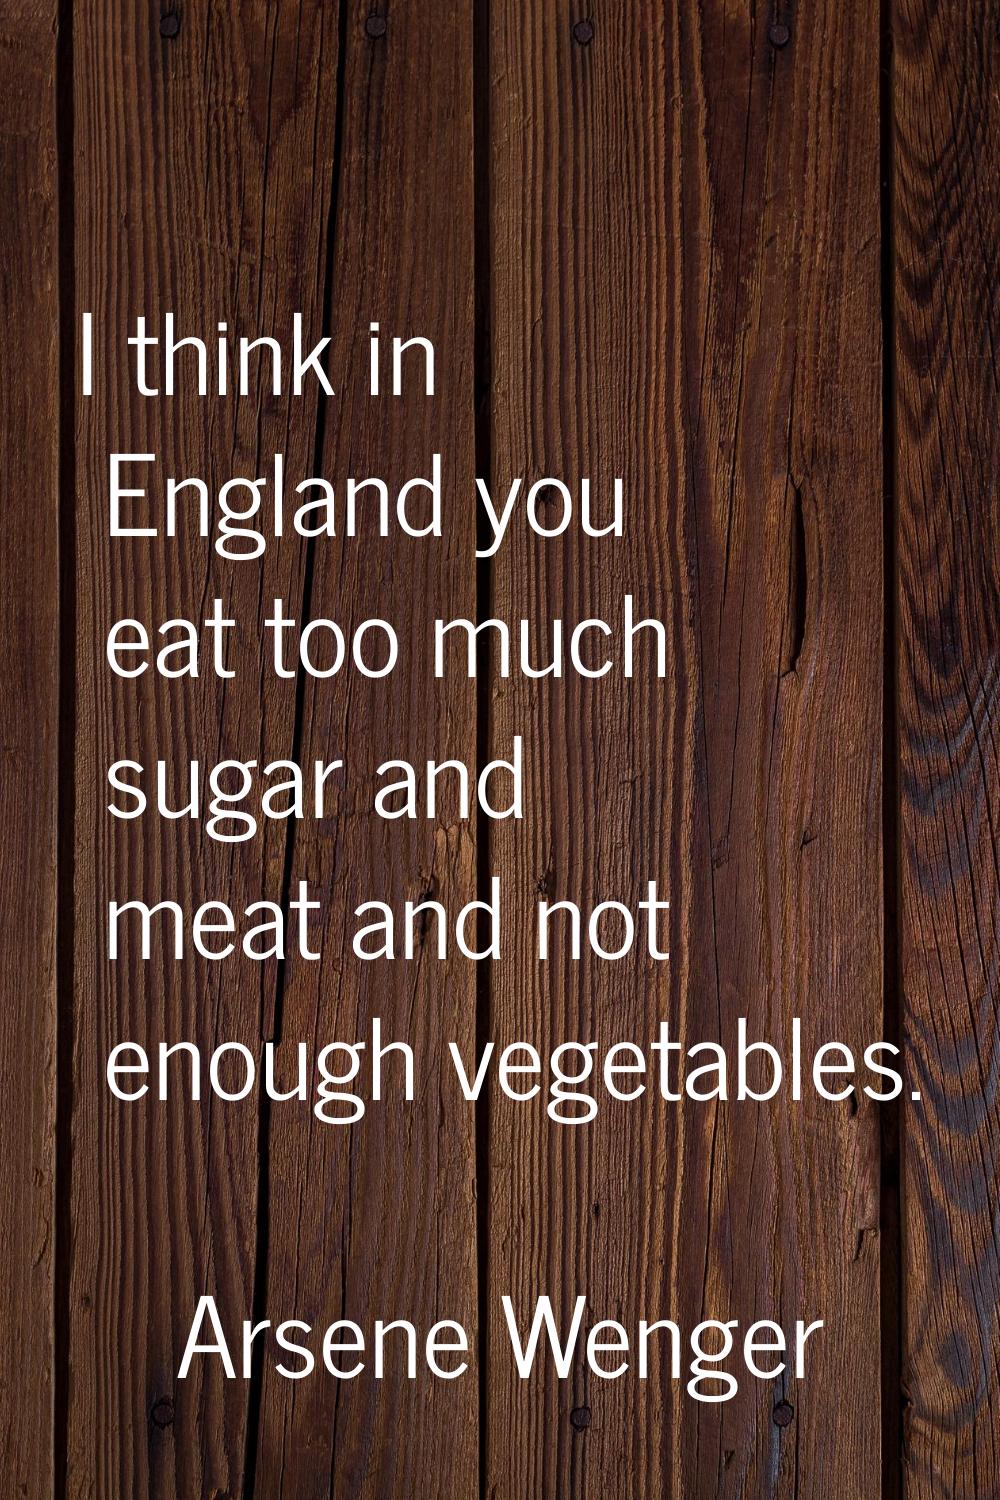 I think in England you eat too much sugar and meat and not enough vegetables.